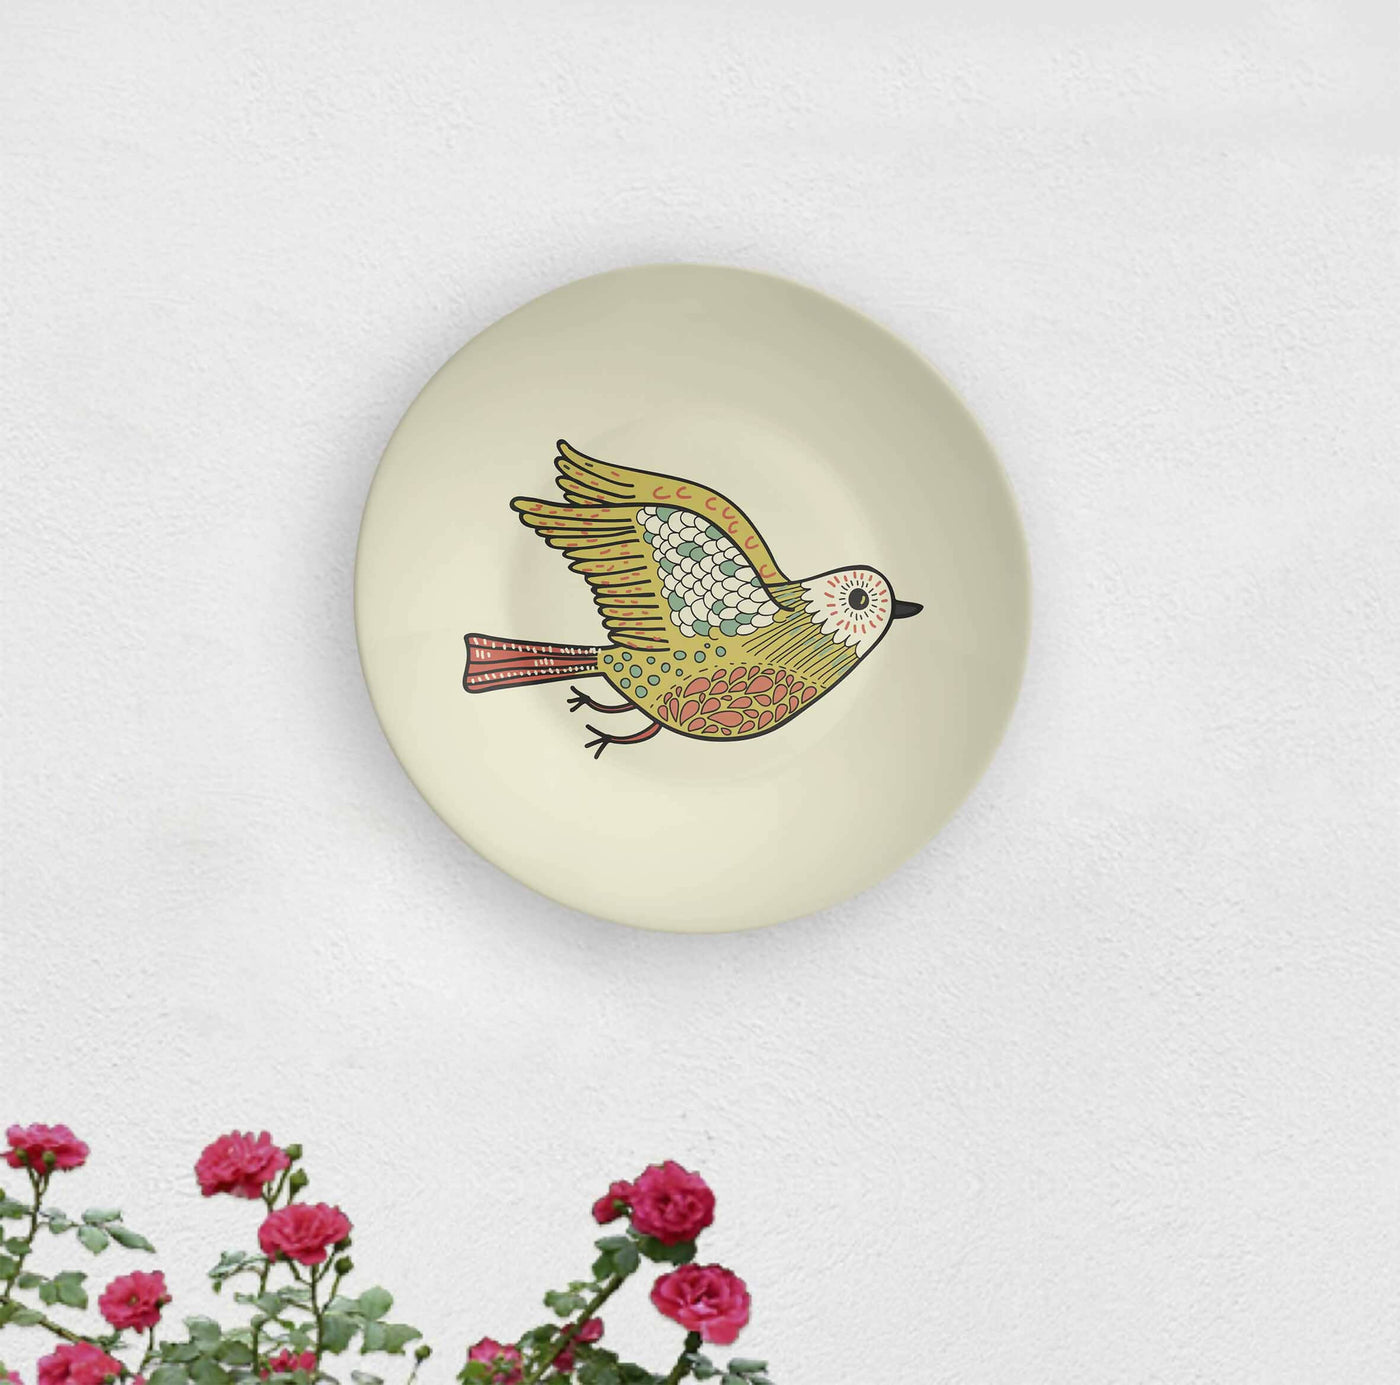 Vintage American Sparrow Decorative Wall Plate - Wall Decor - 1